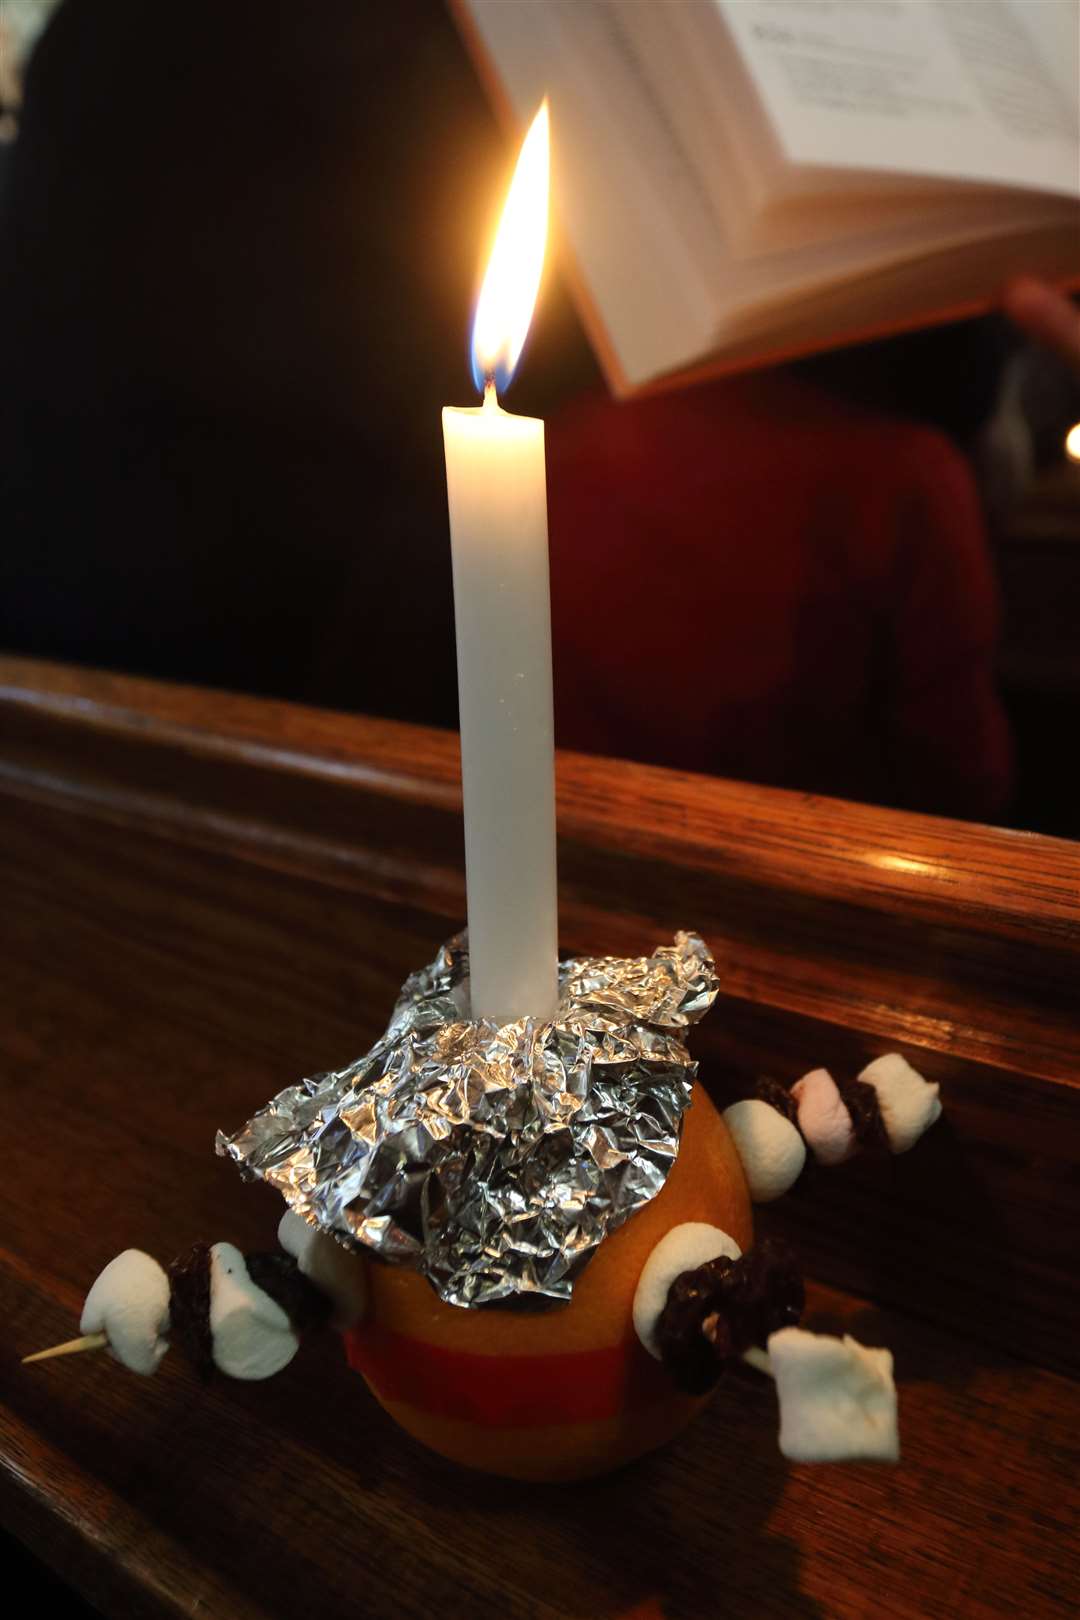 The congregation are provided with the Christingles which light up the church.